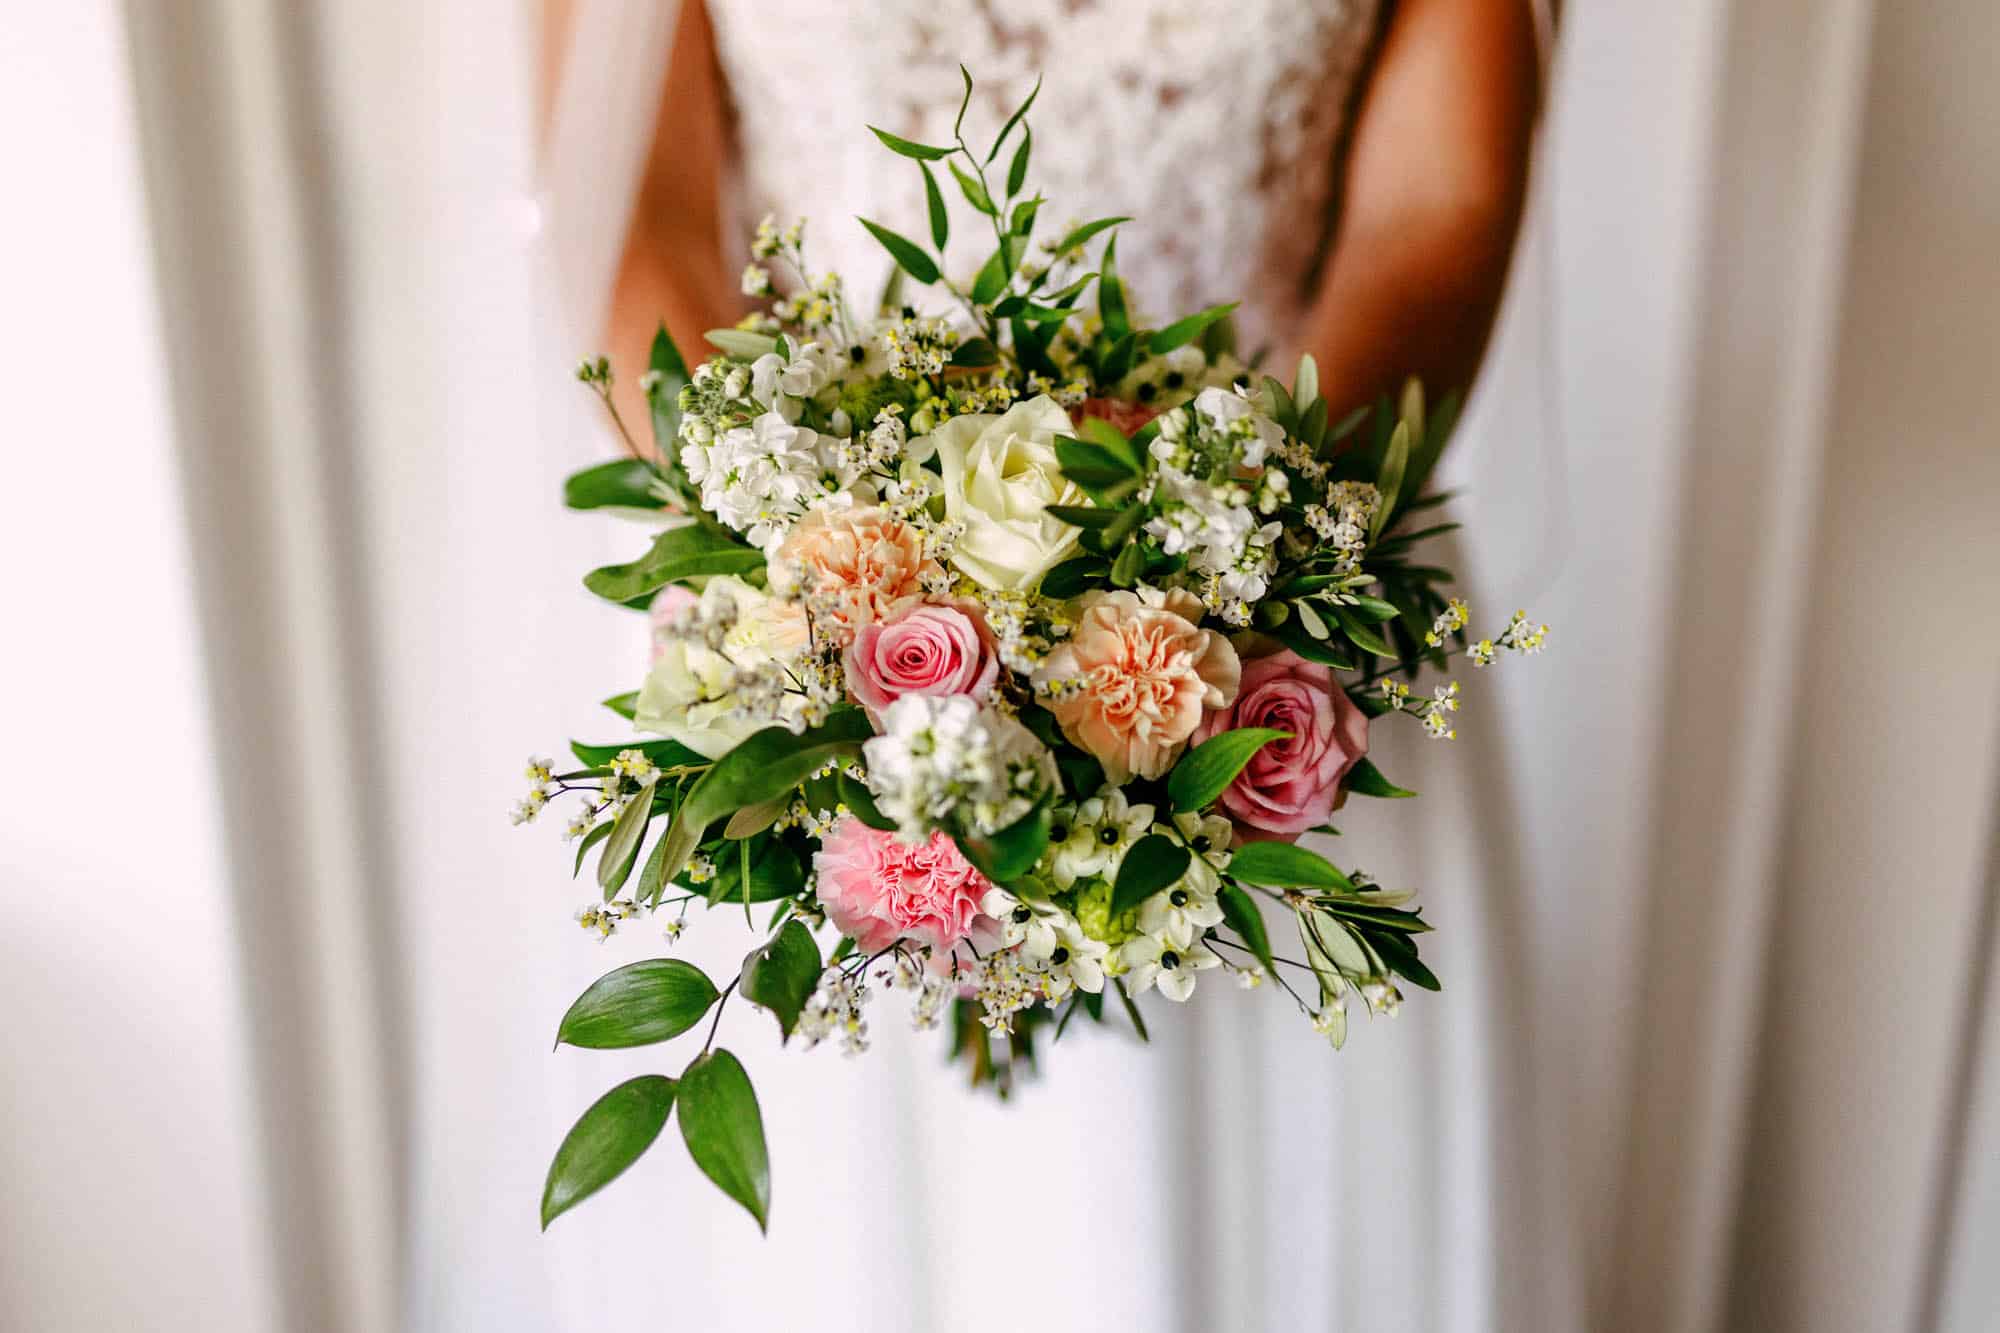 Wedding bouquet: A bride holding a wedding bouquet of pink and white flowers.